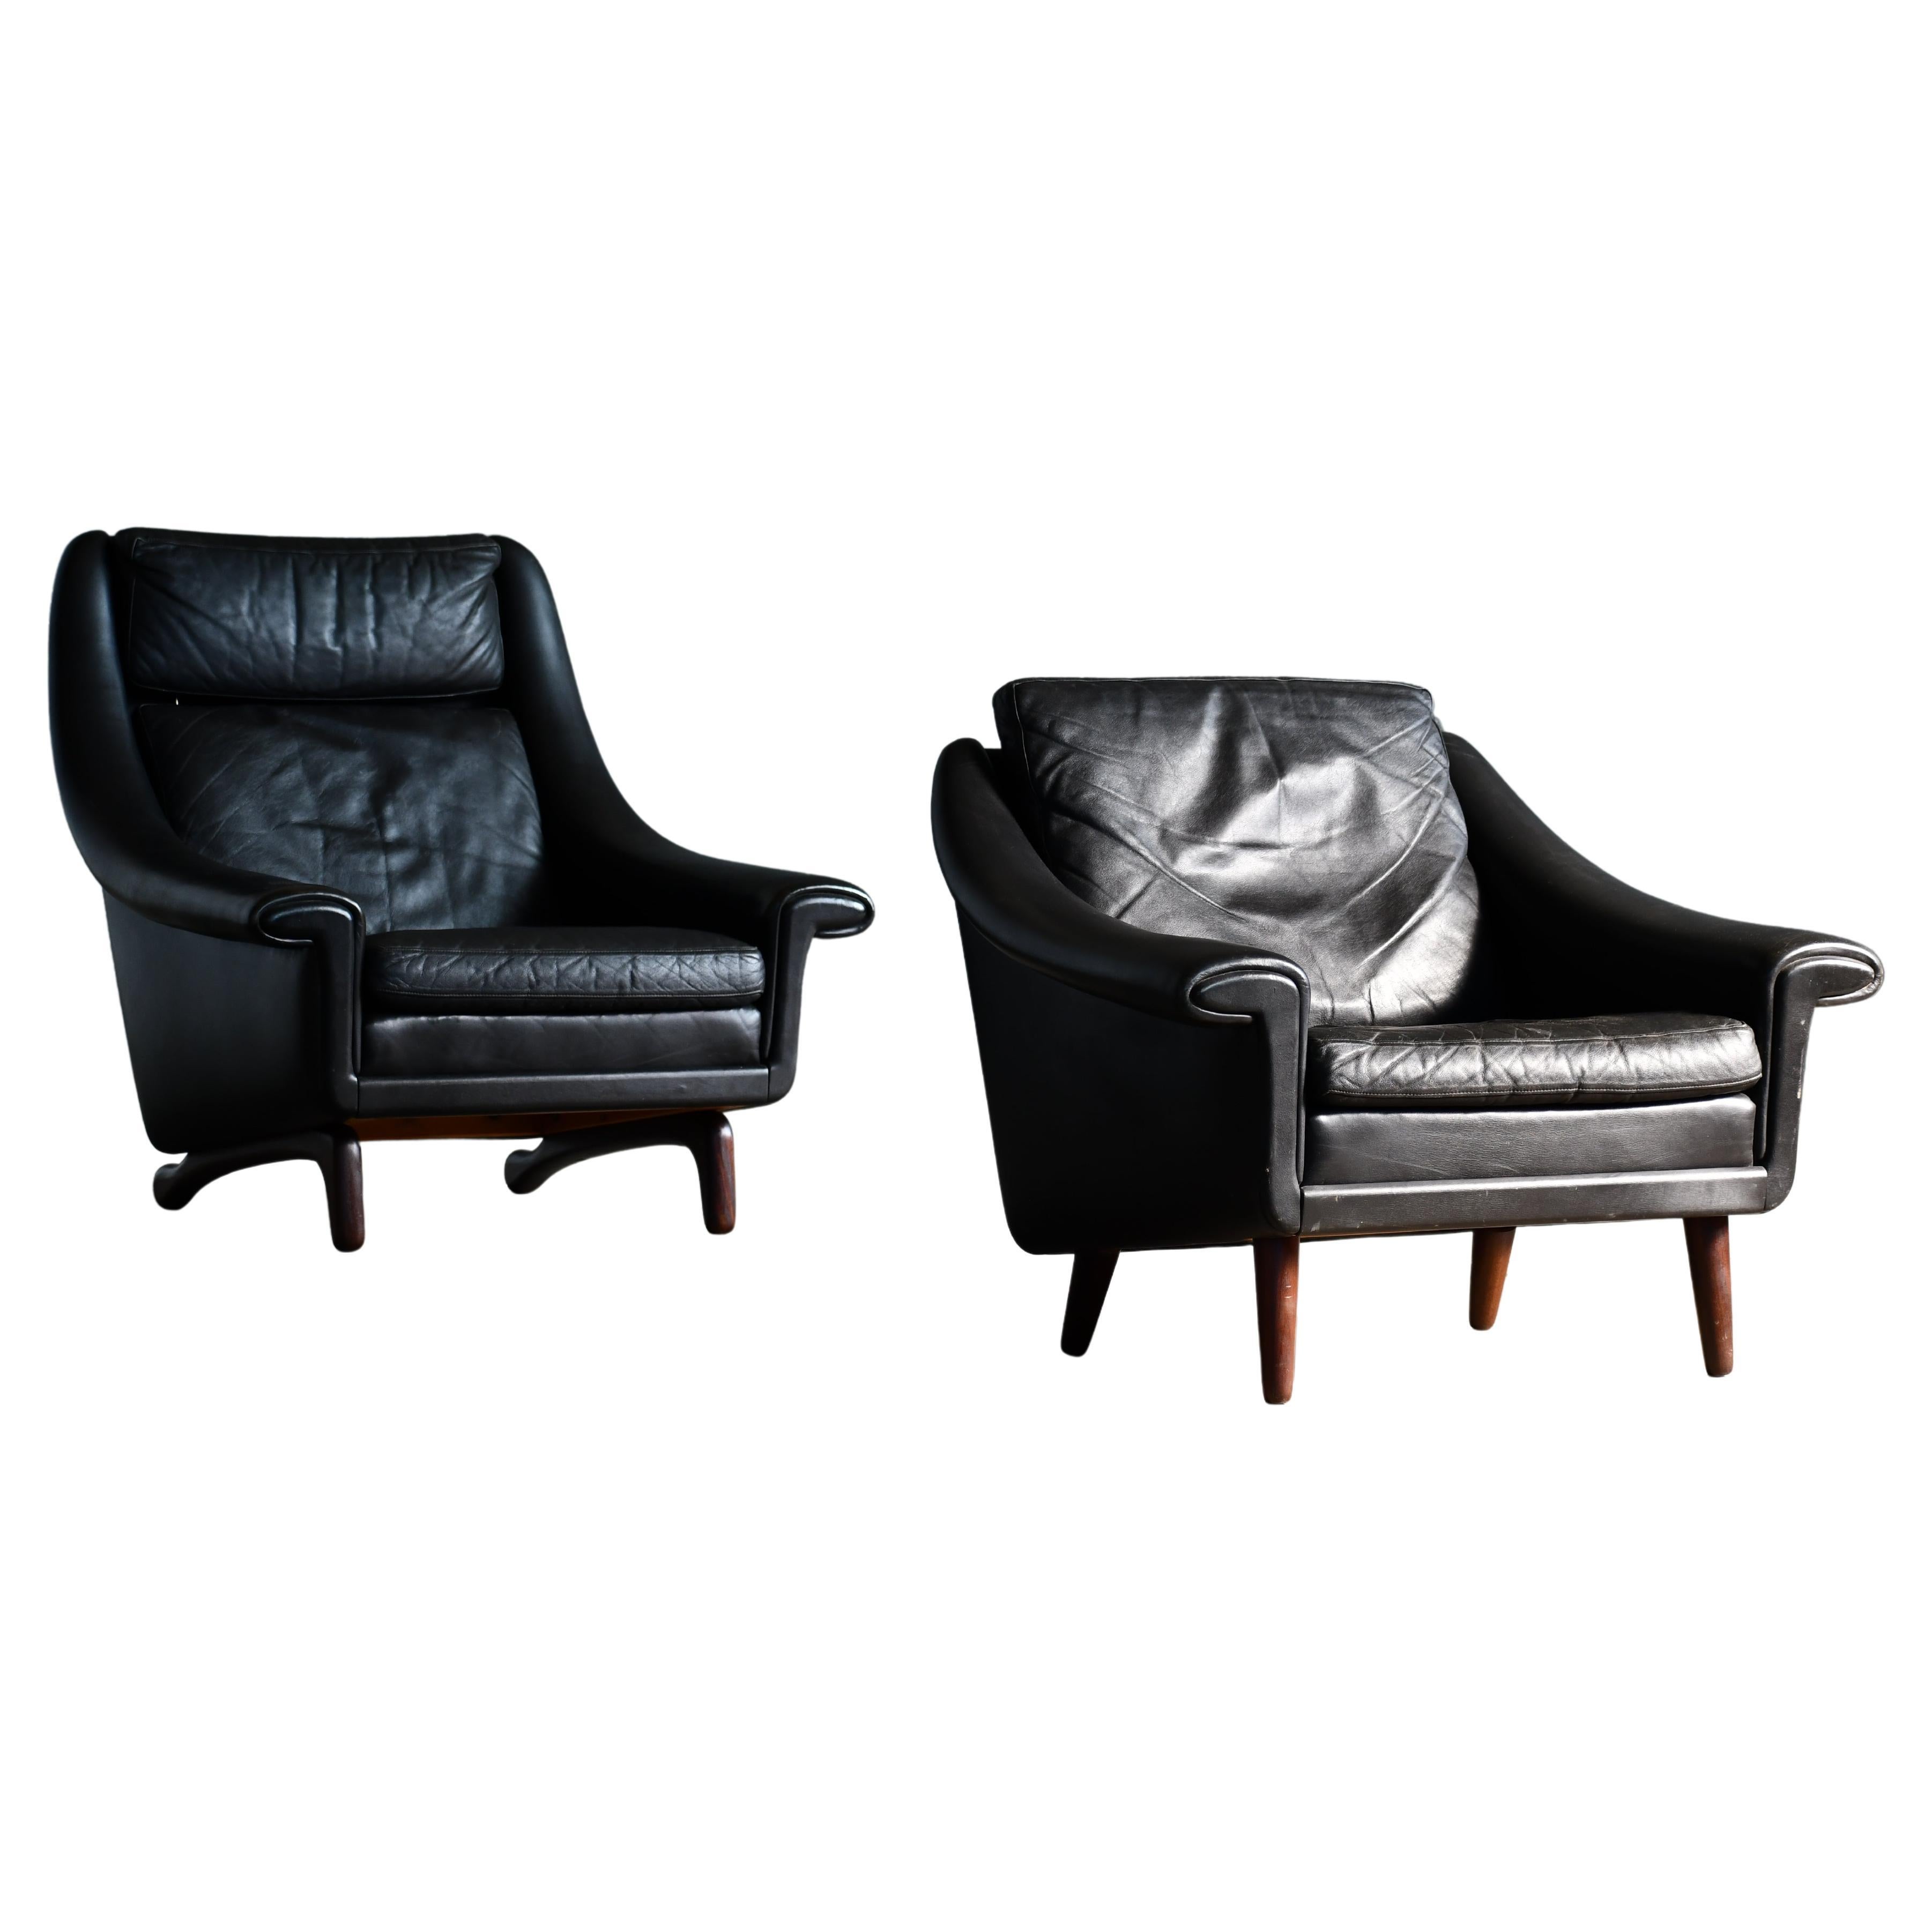 Pair of 1960s Easy Lounge Chairs Model Matador in Black Leather and Teak Base For Sale